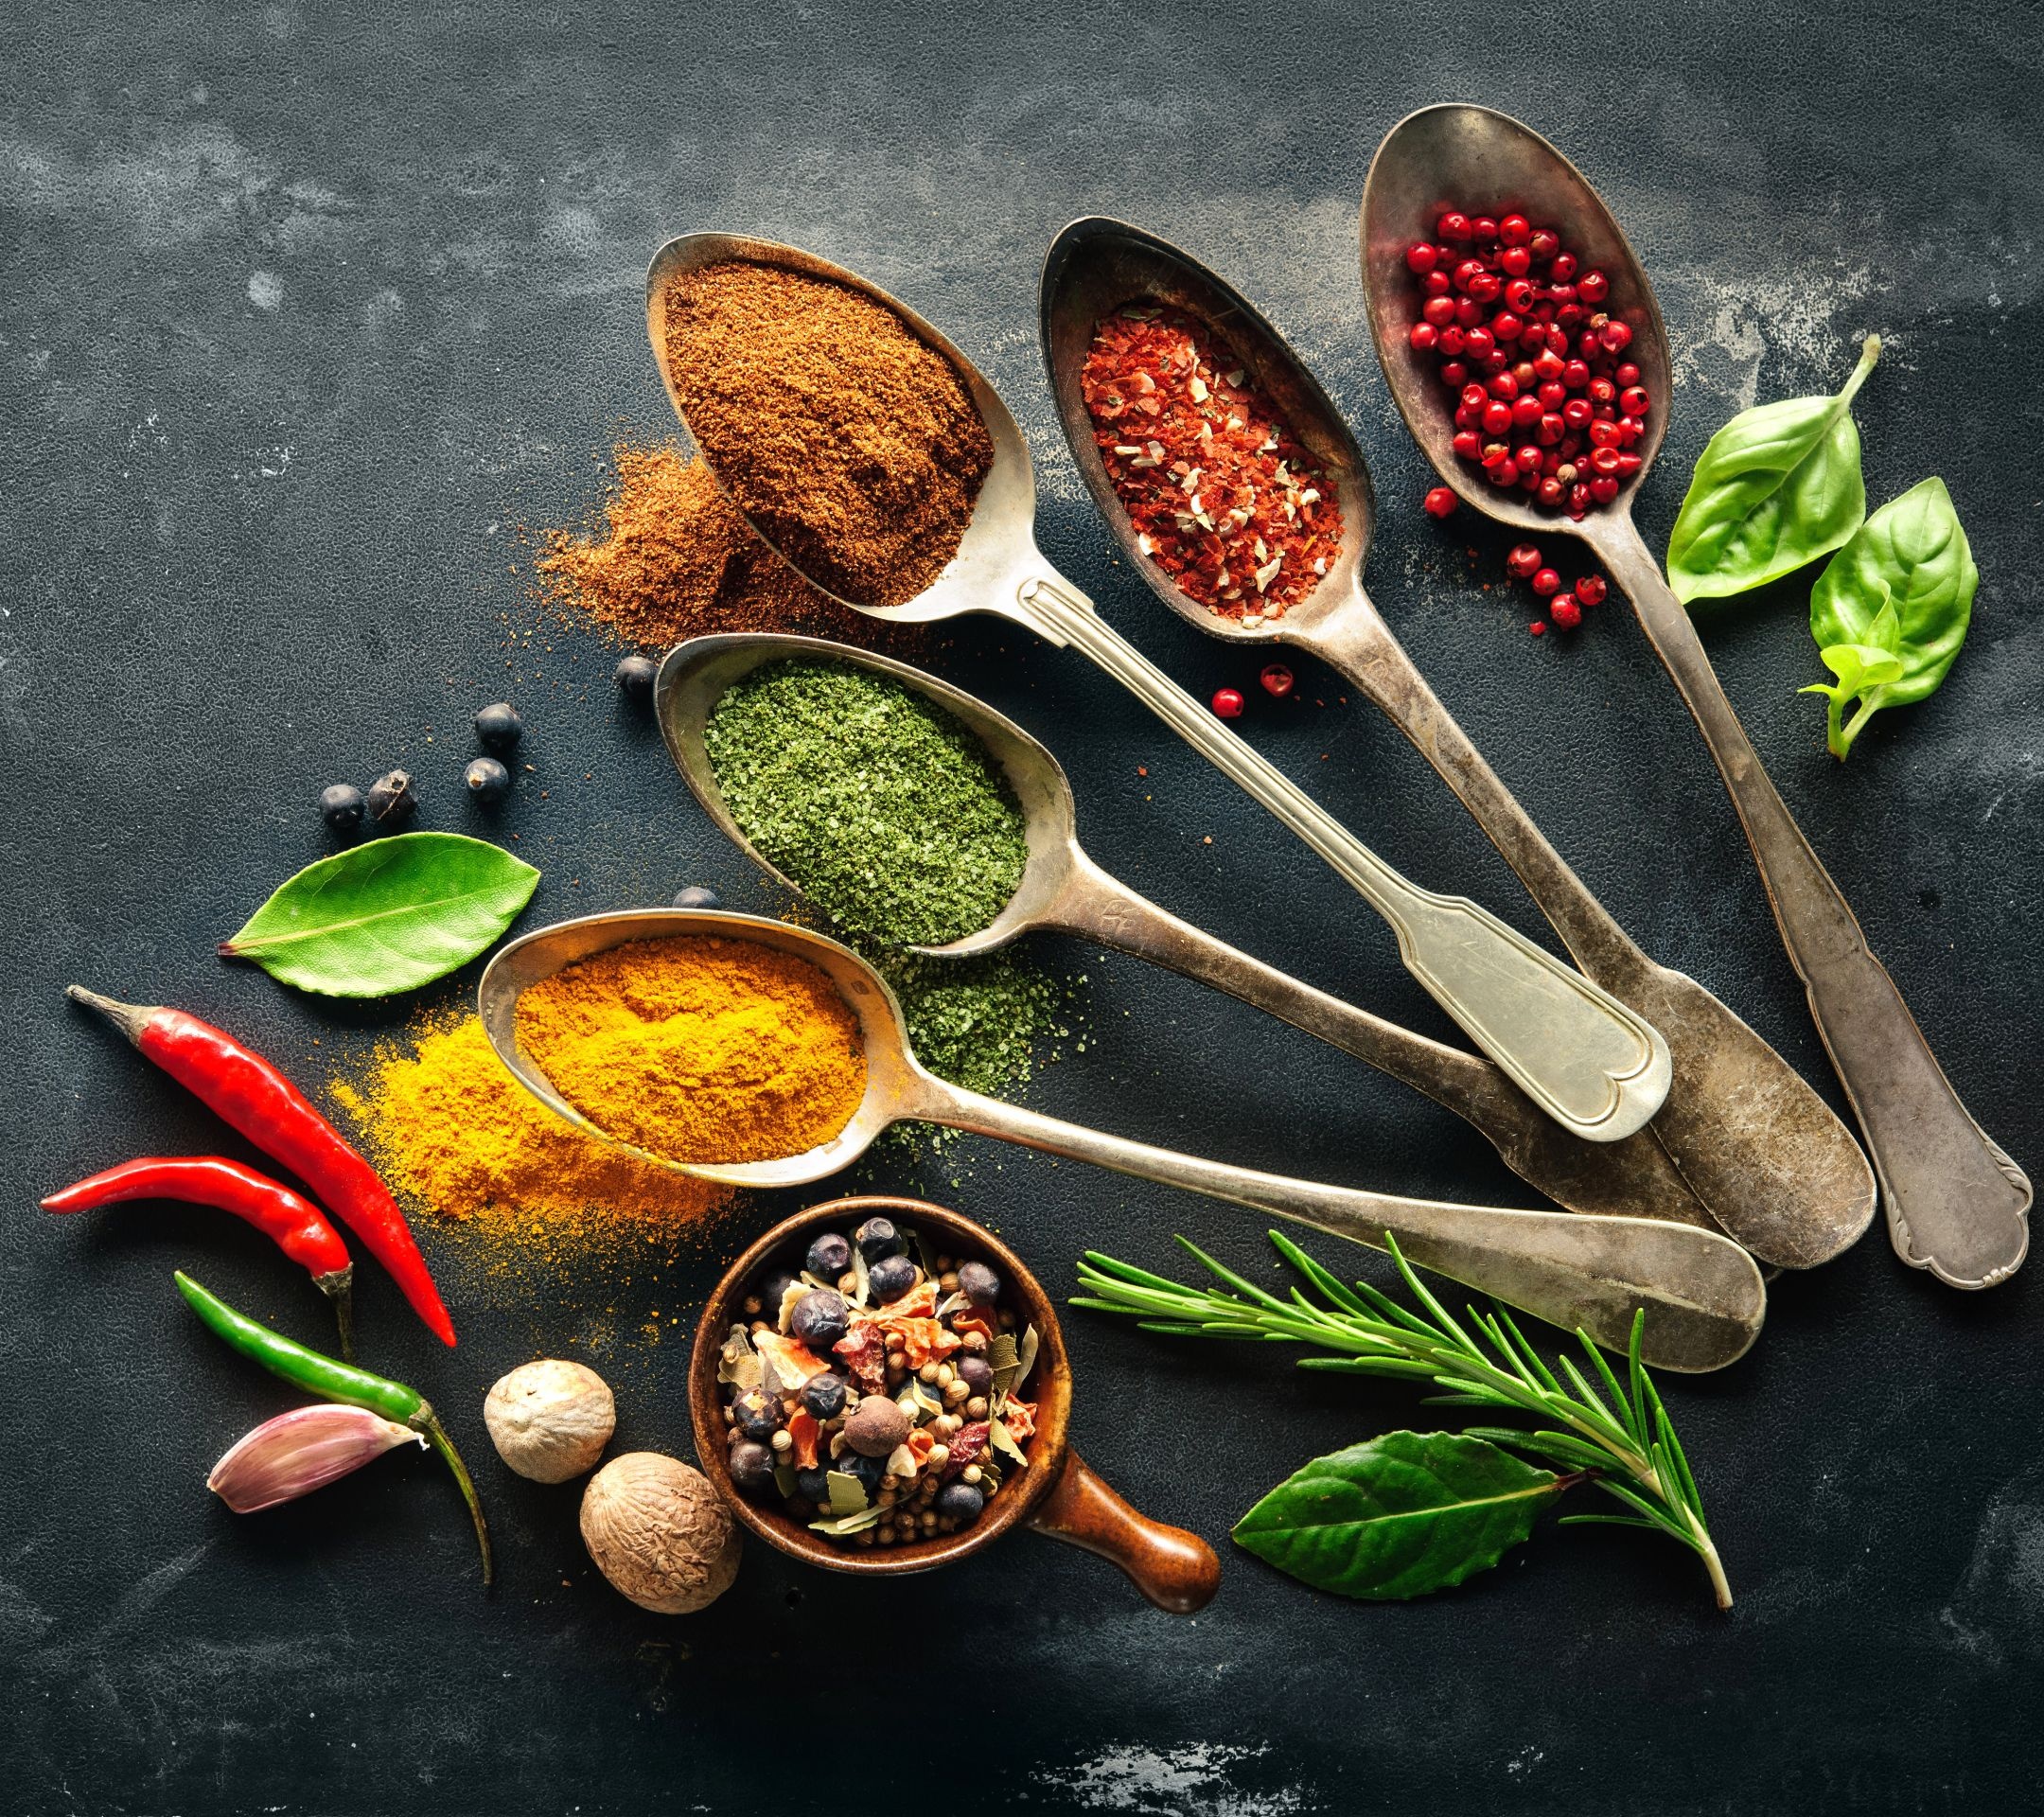 Spices: Herbs, Adding amazing flavor to rice, meats, soups. 2160x1920 HD Wallpaper.